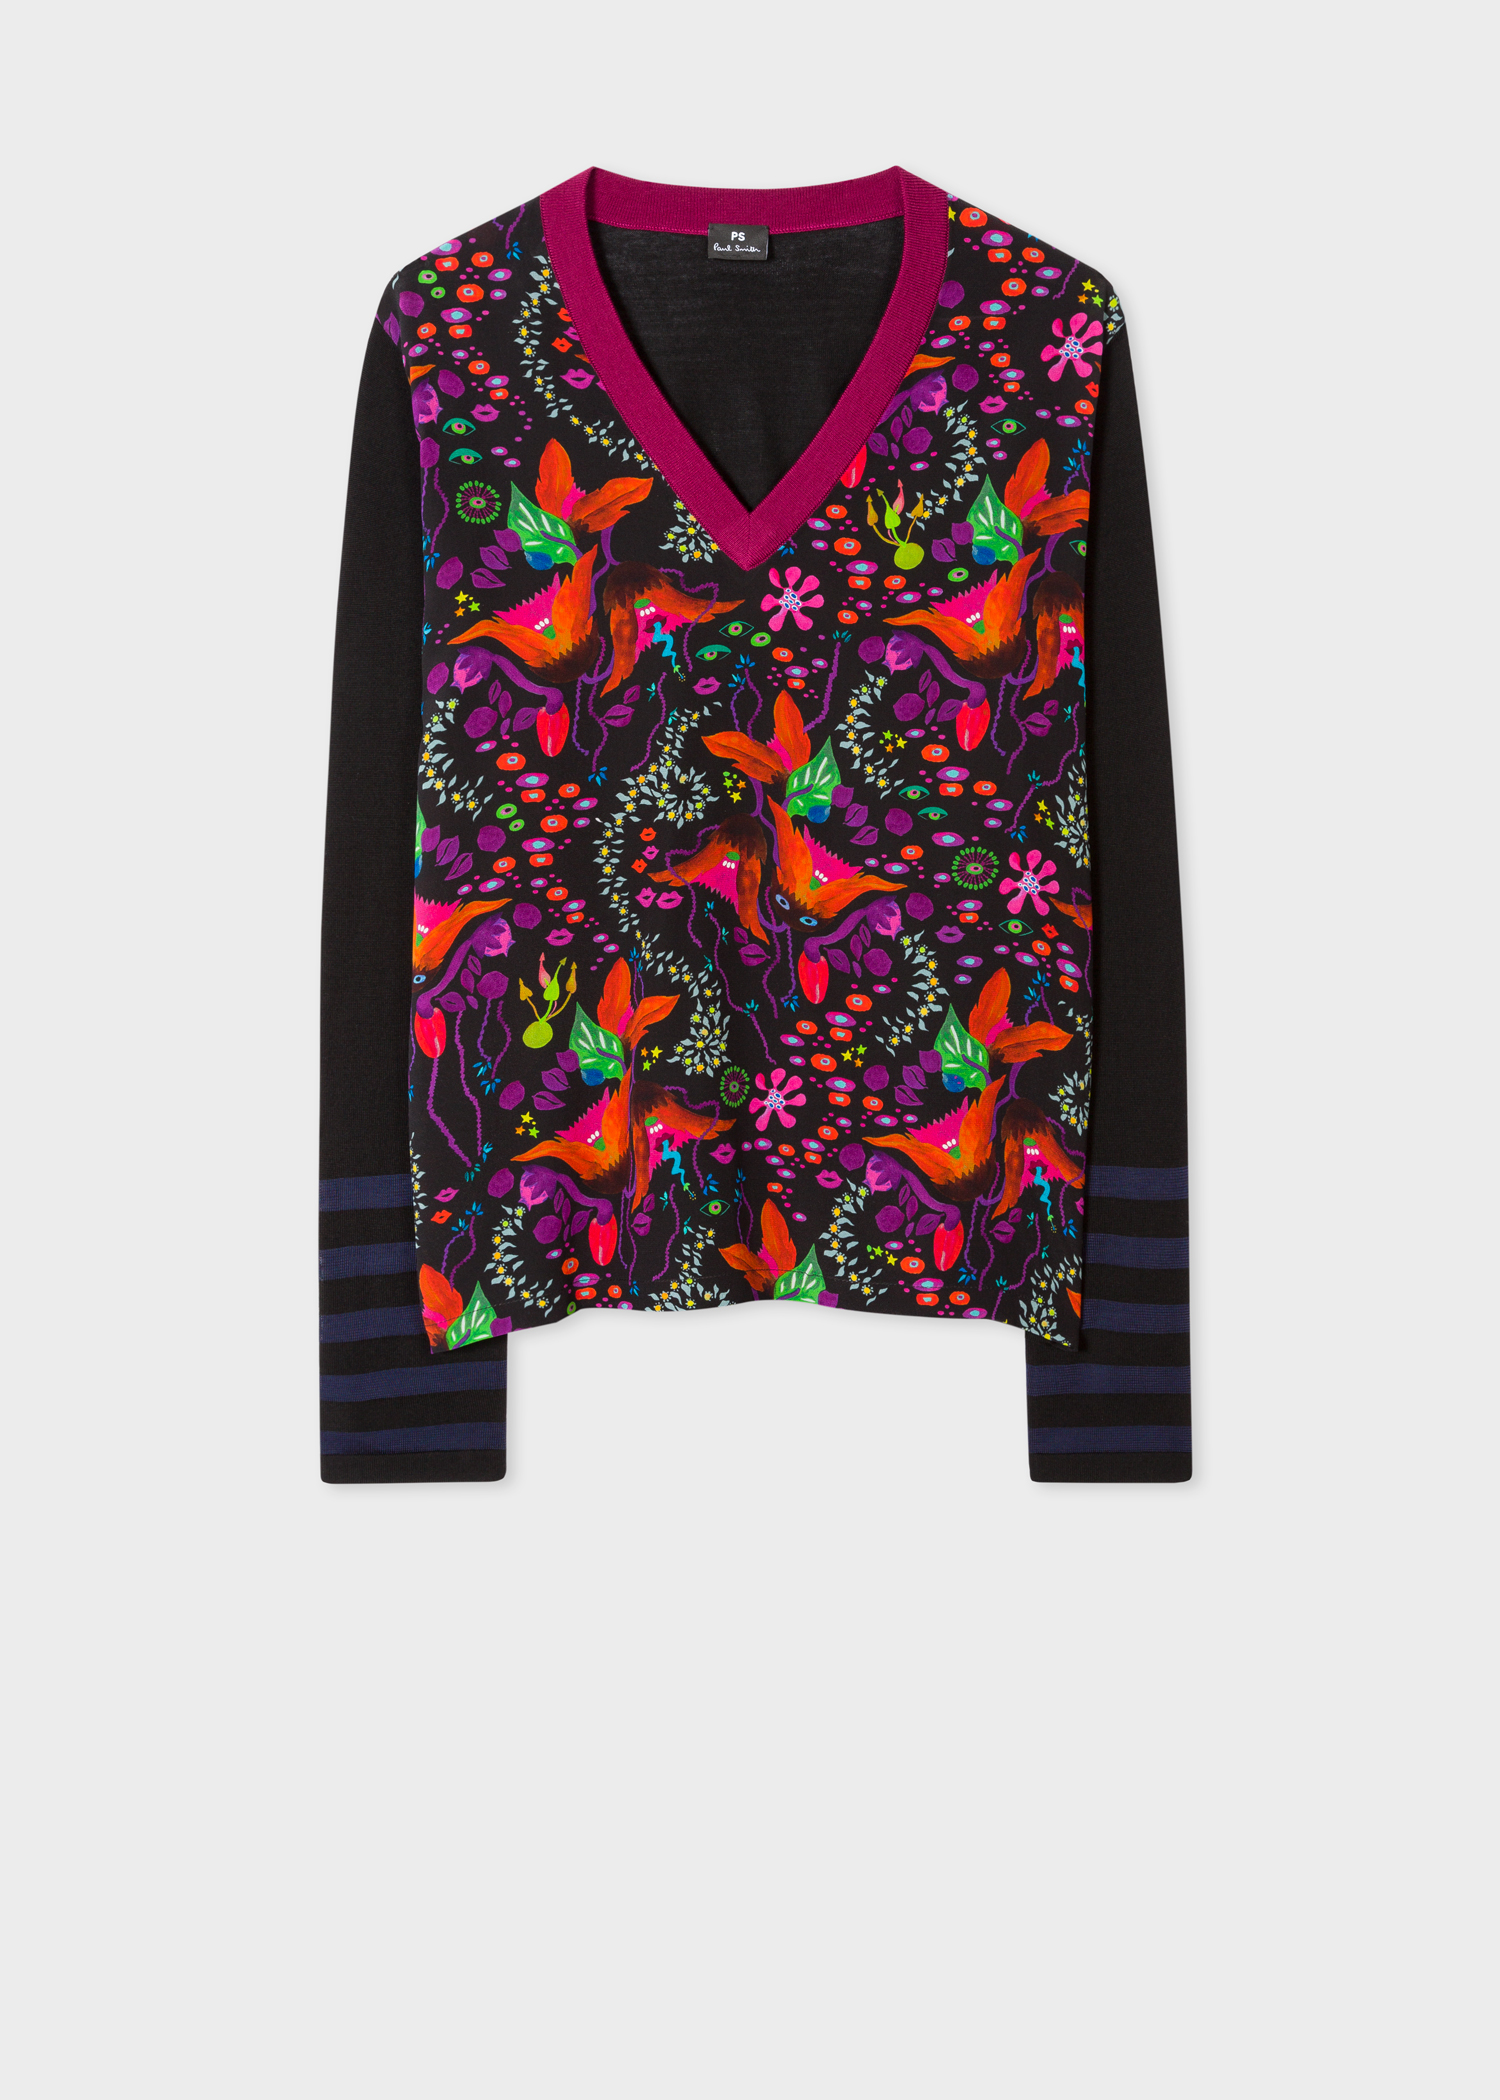 Front view - Women's Black 'Earthling Floral' Wool V-Neck Sweater Paul Smith